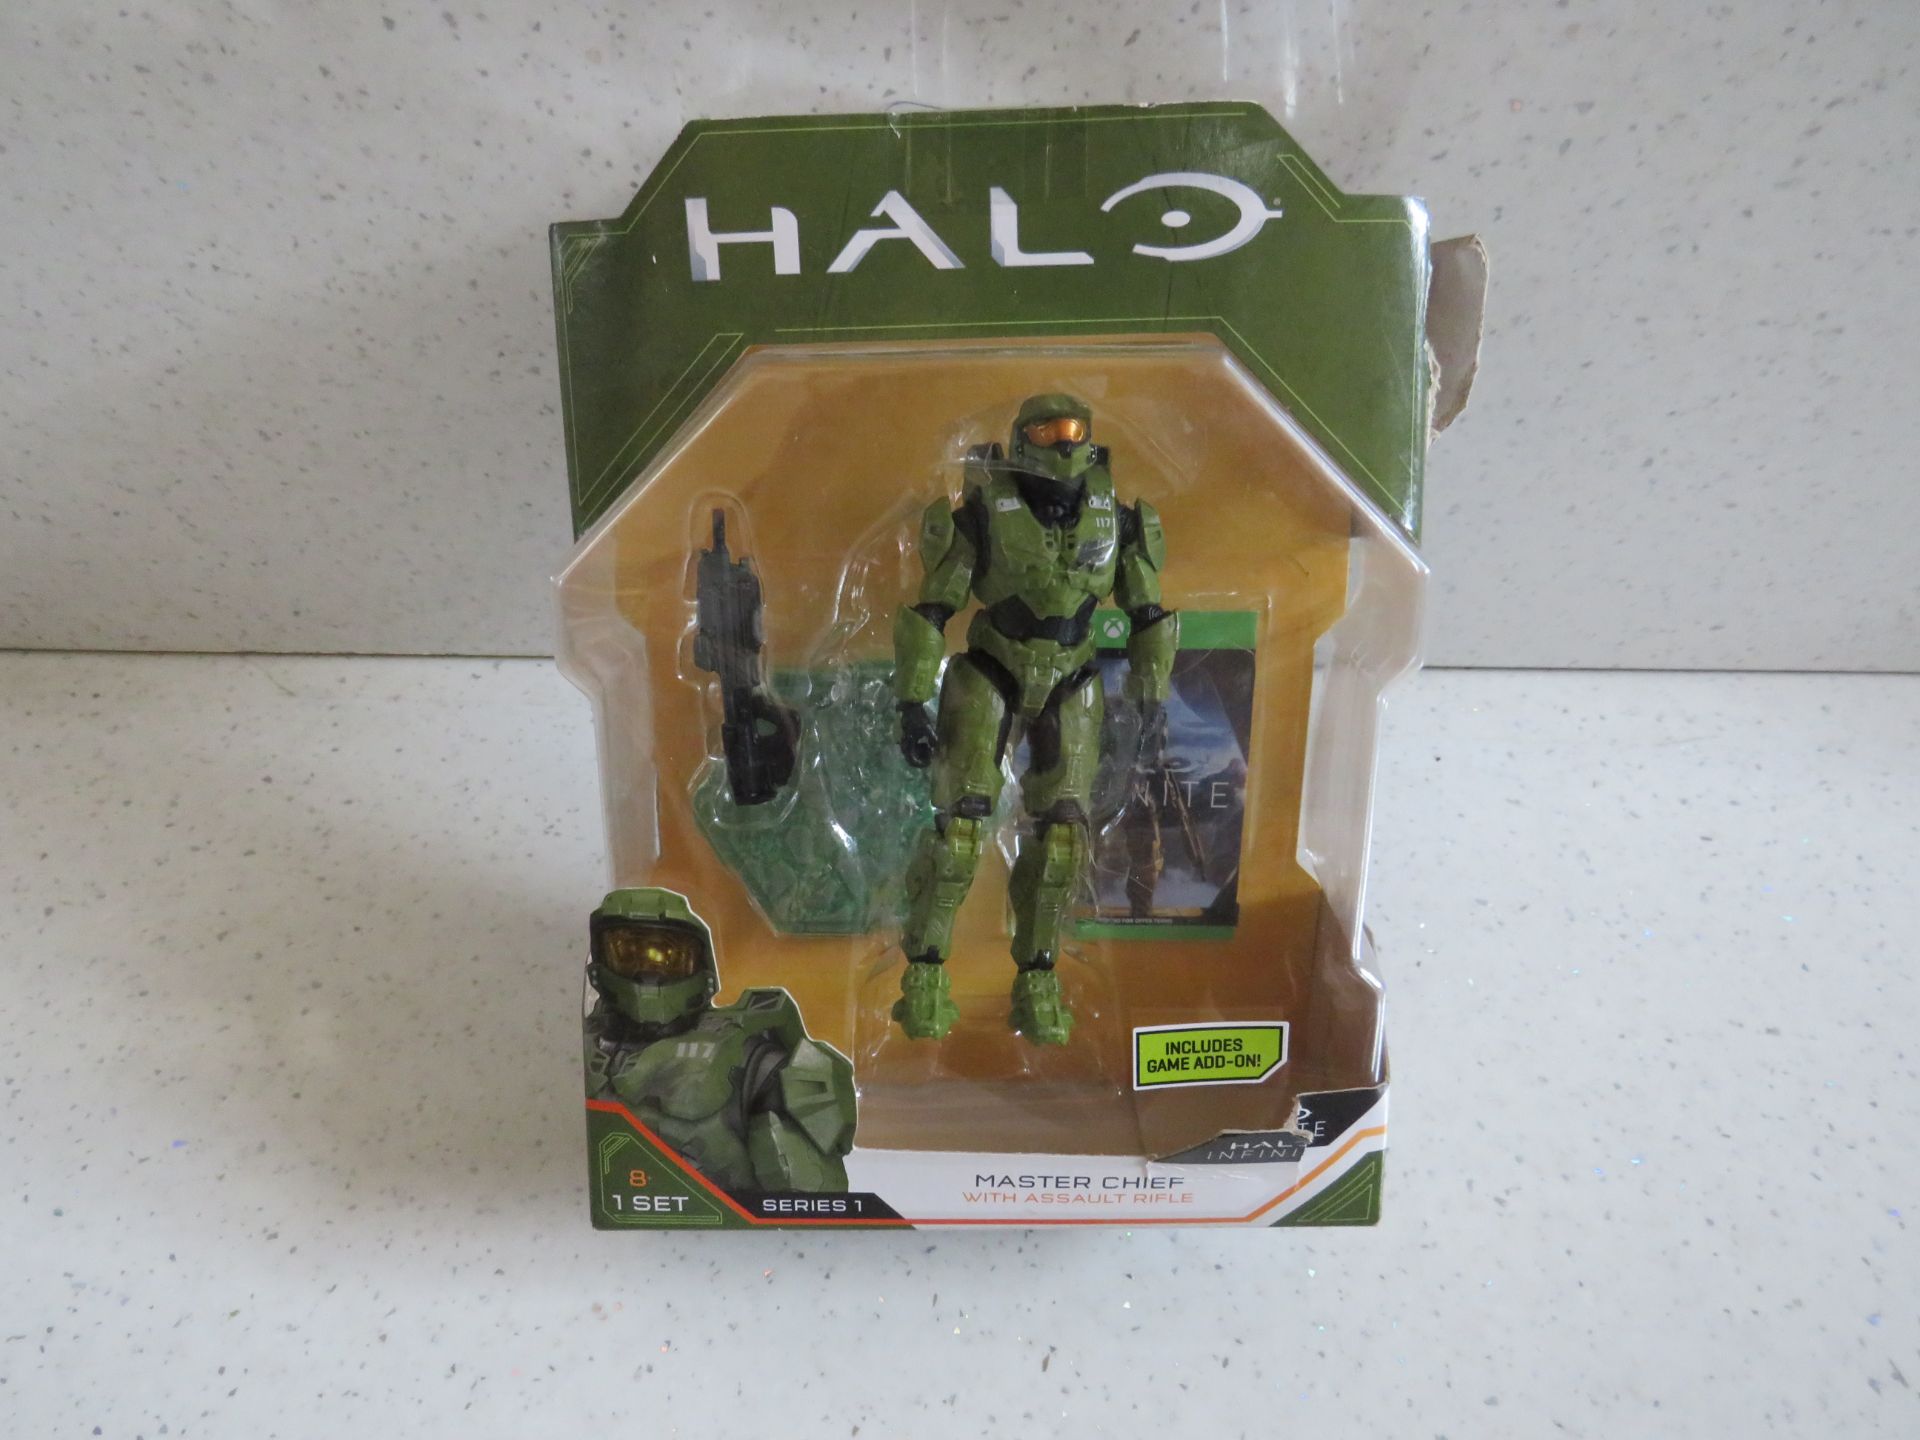 Halo - Series 1 Master chief With Assault Rifle Figure - Packaging Damaged.